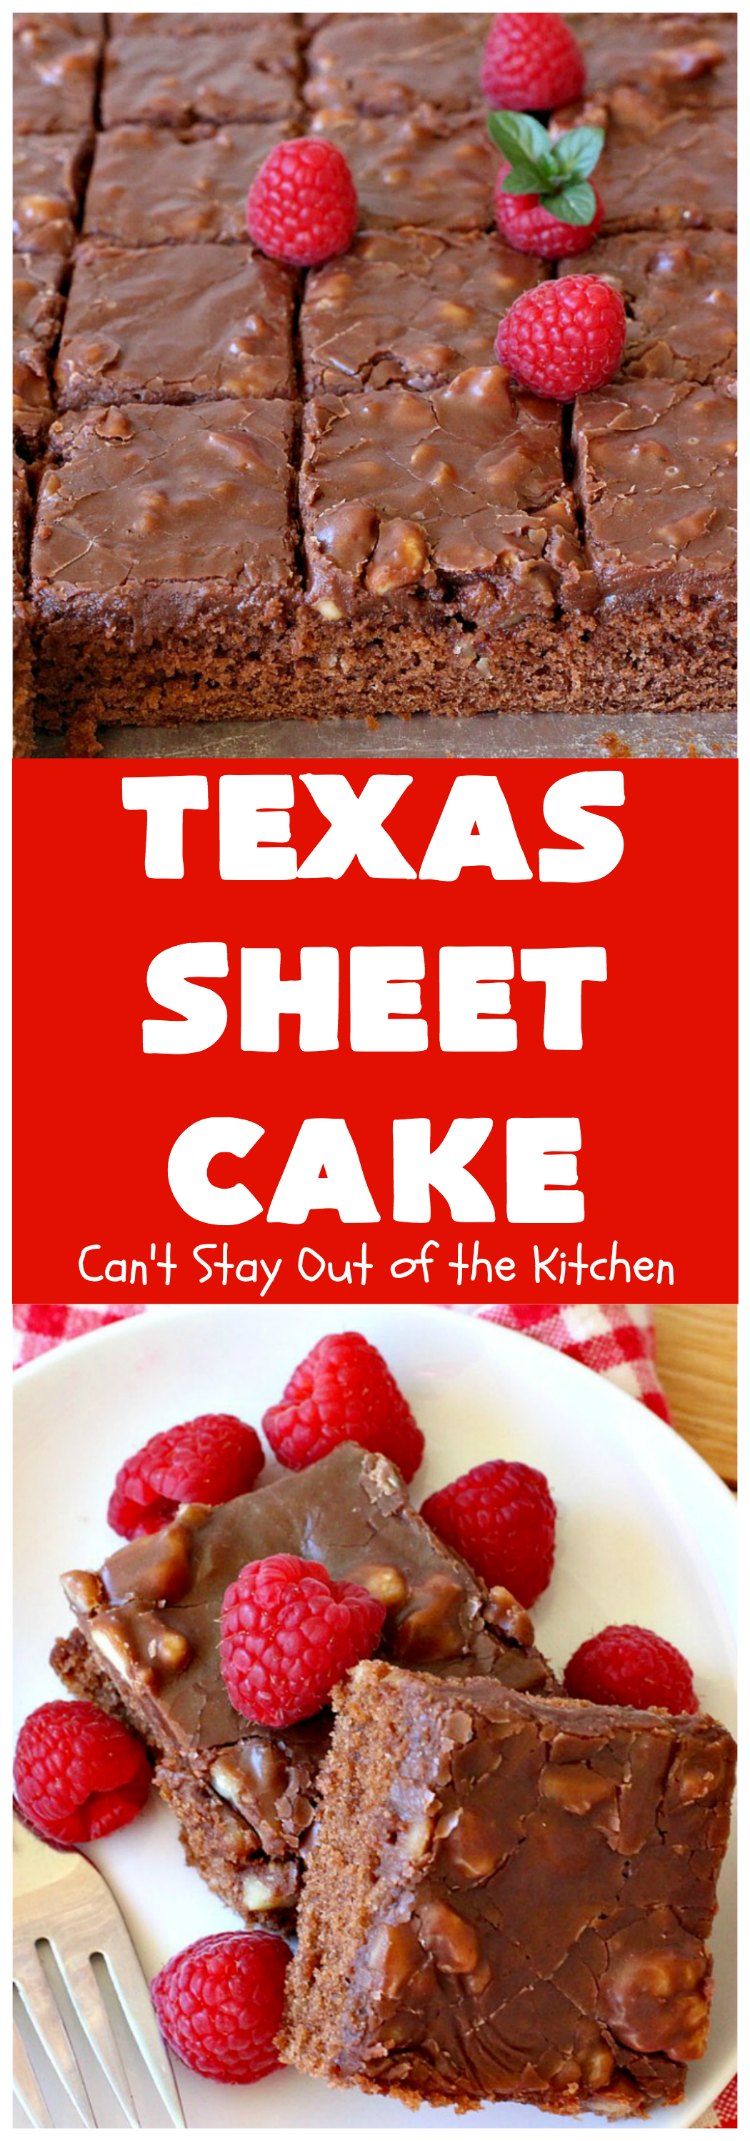 Texas Sheet Cake | Can't Stay Out of the Kitchen